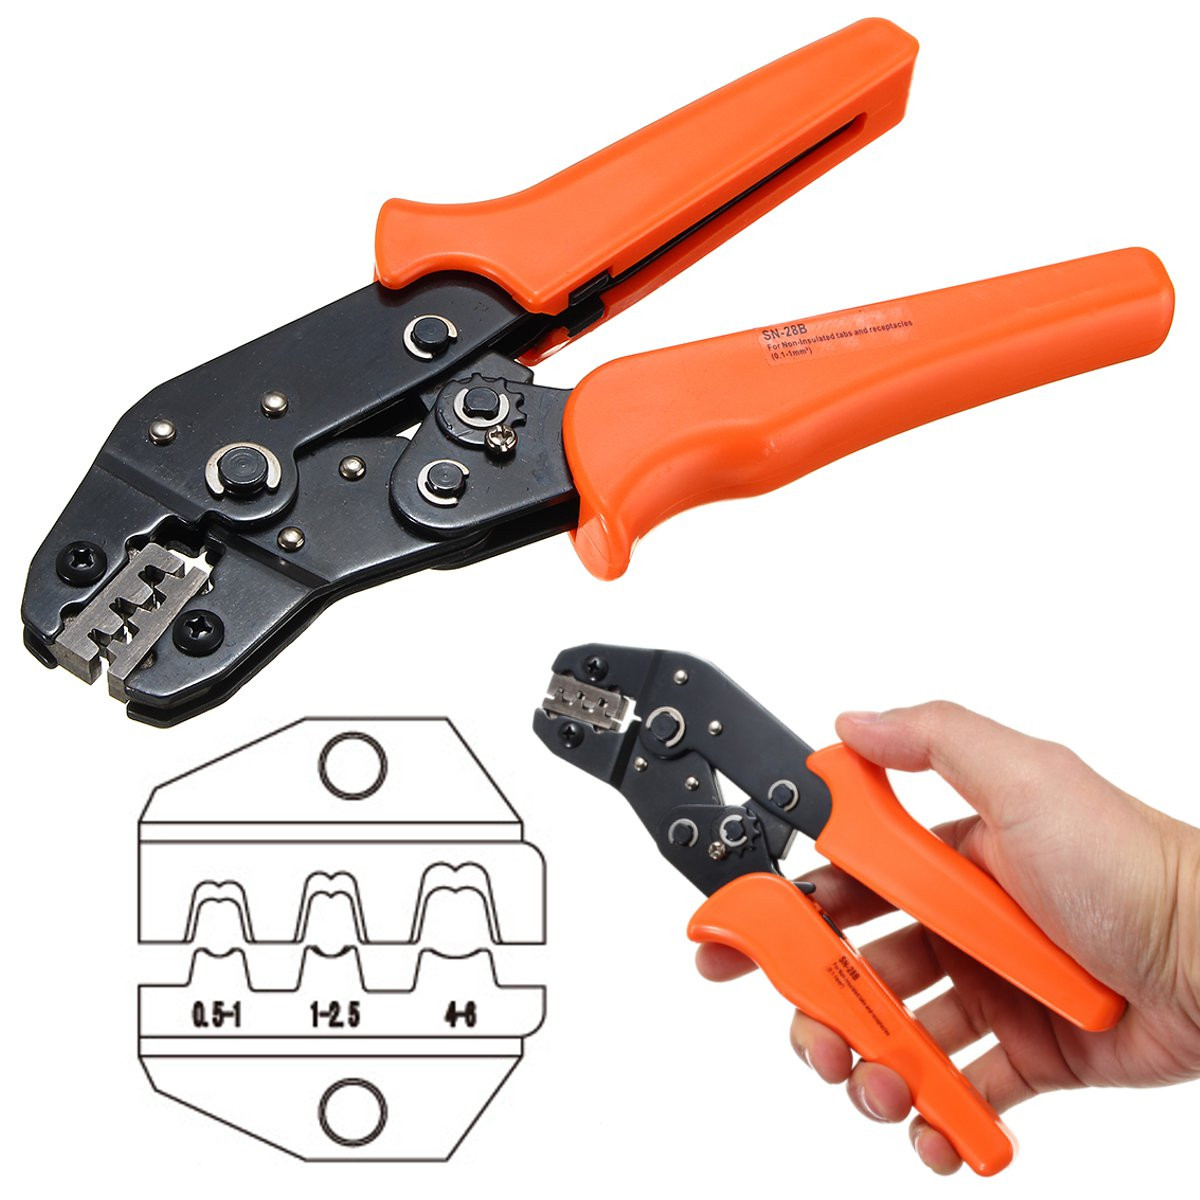 

SN-28B 18-28AWG 0.1-1.0mm² Cables Plier Crimping Tool for Non-insulated Tab Receptacle